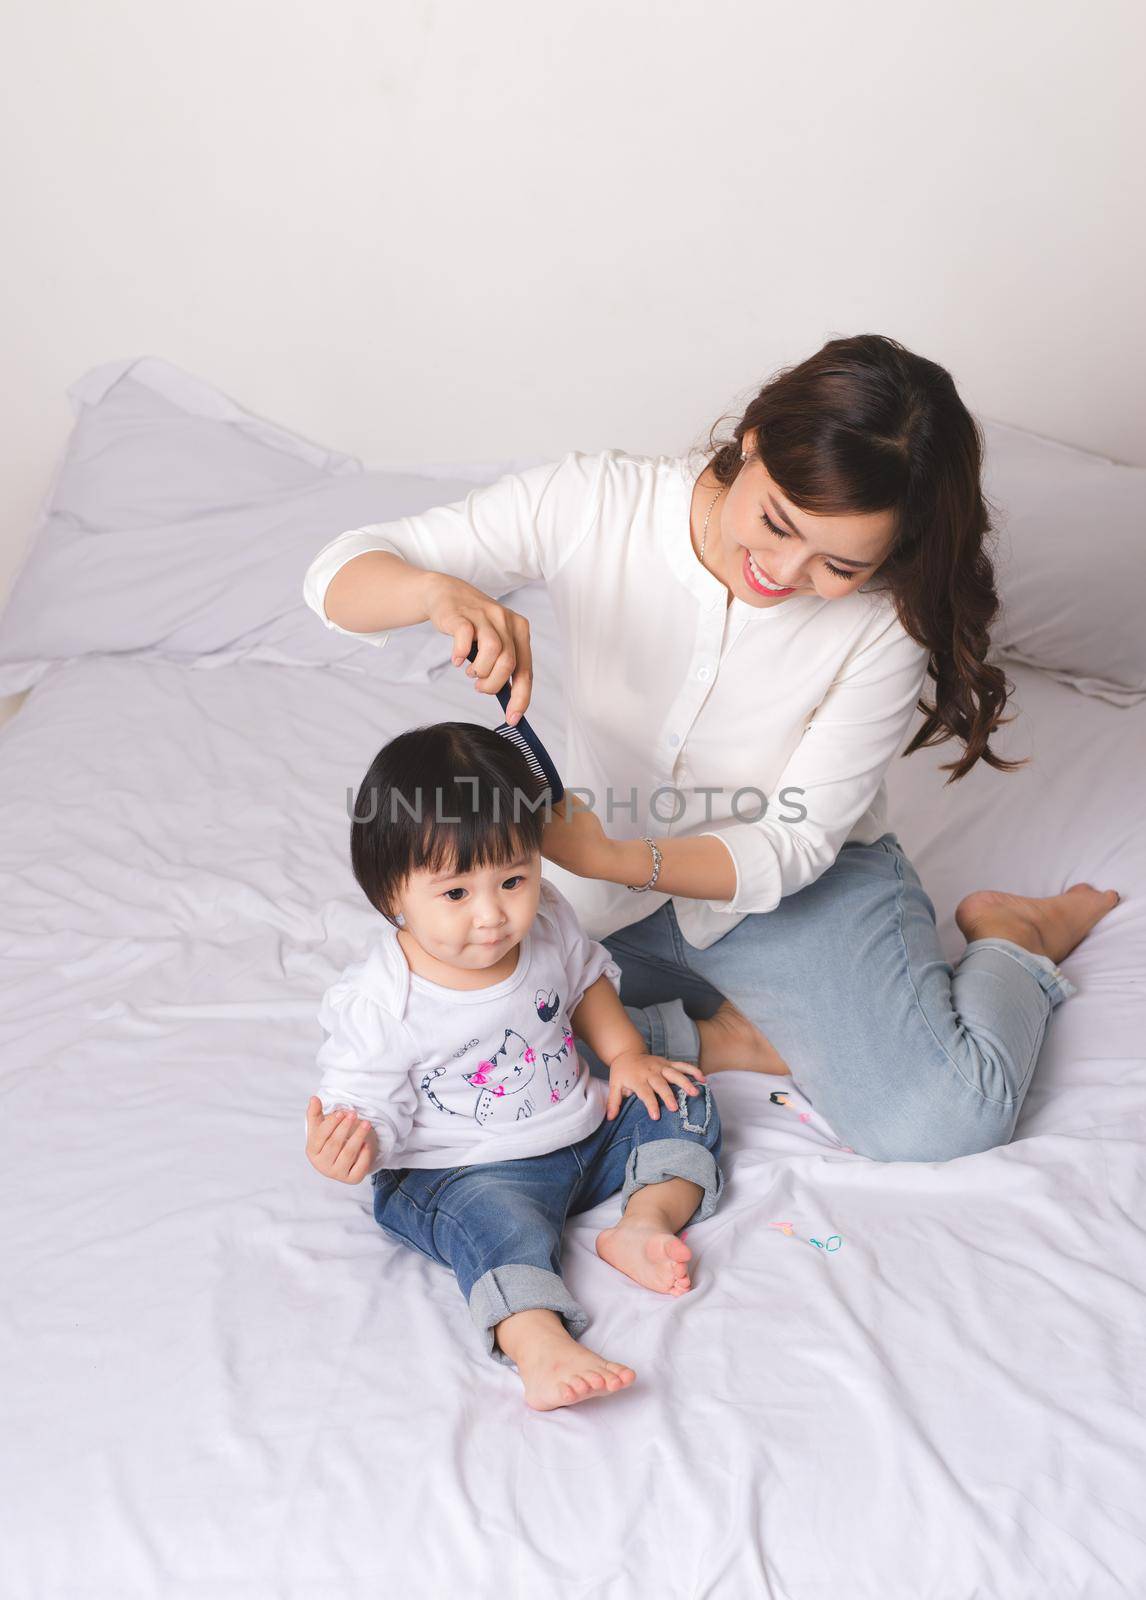 Happy loving family. Mom and child girl are having fun on the bed.